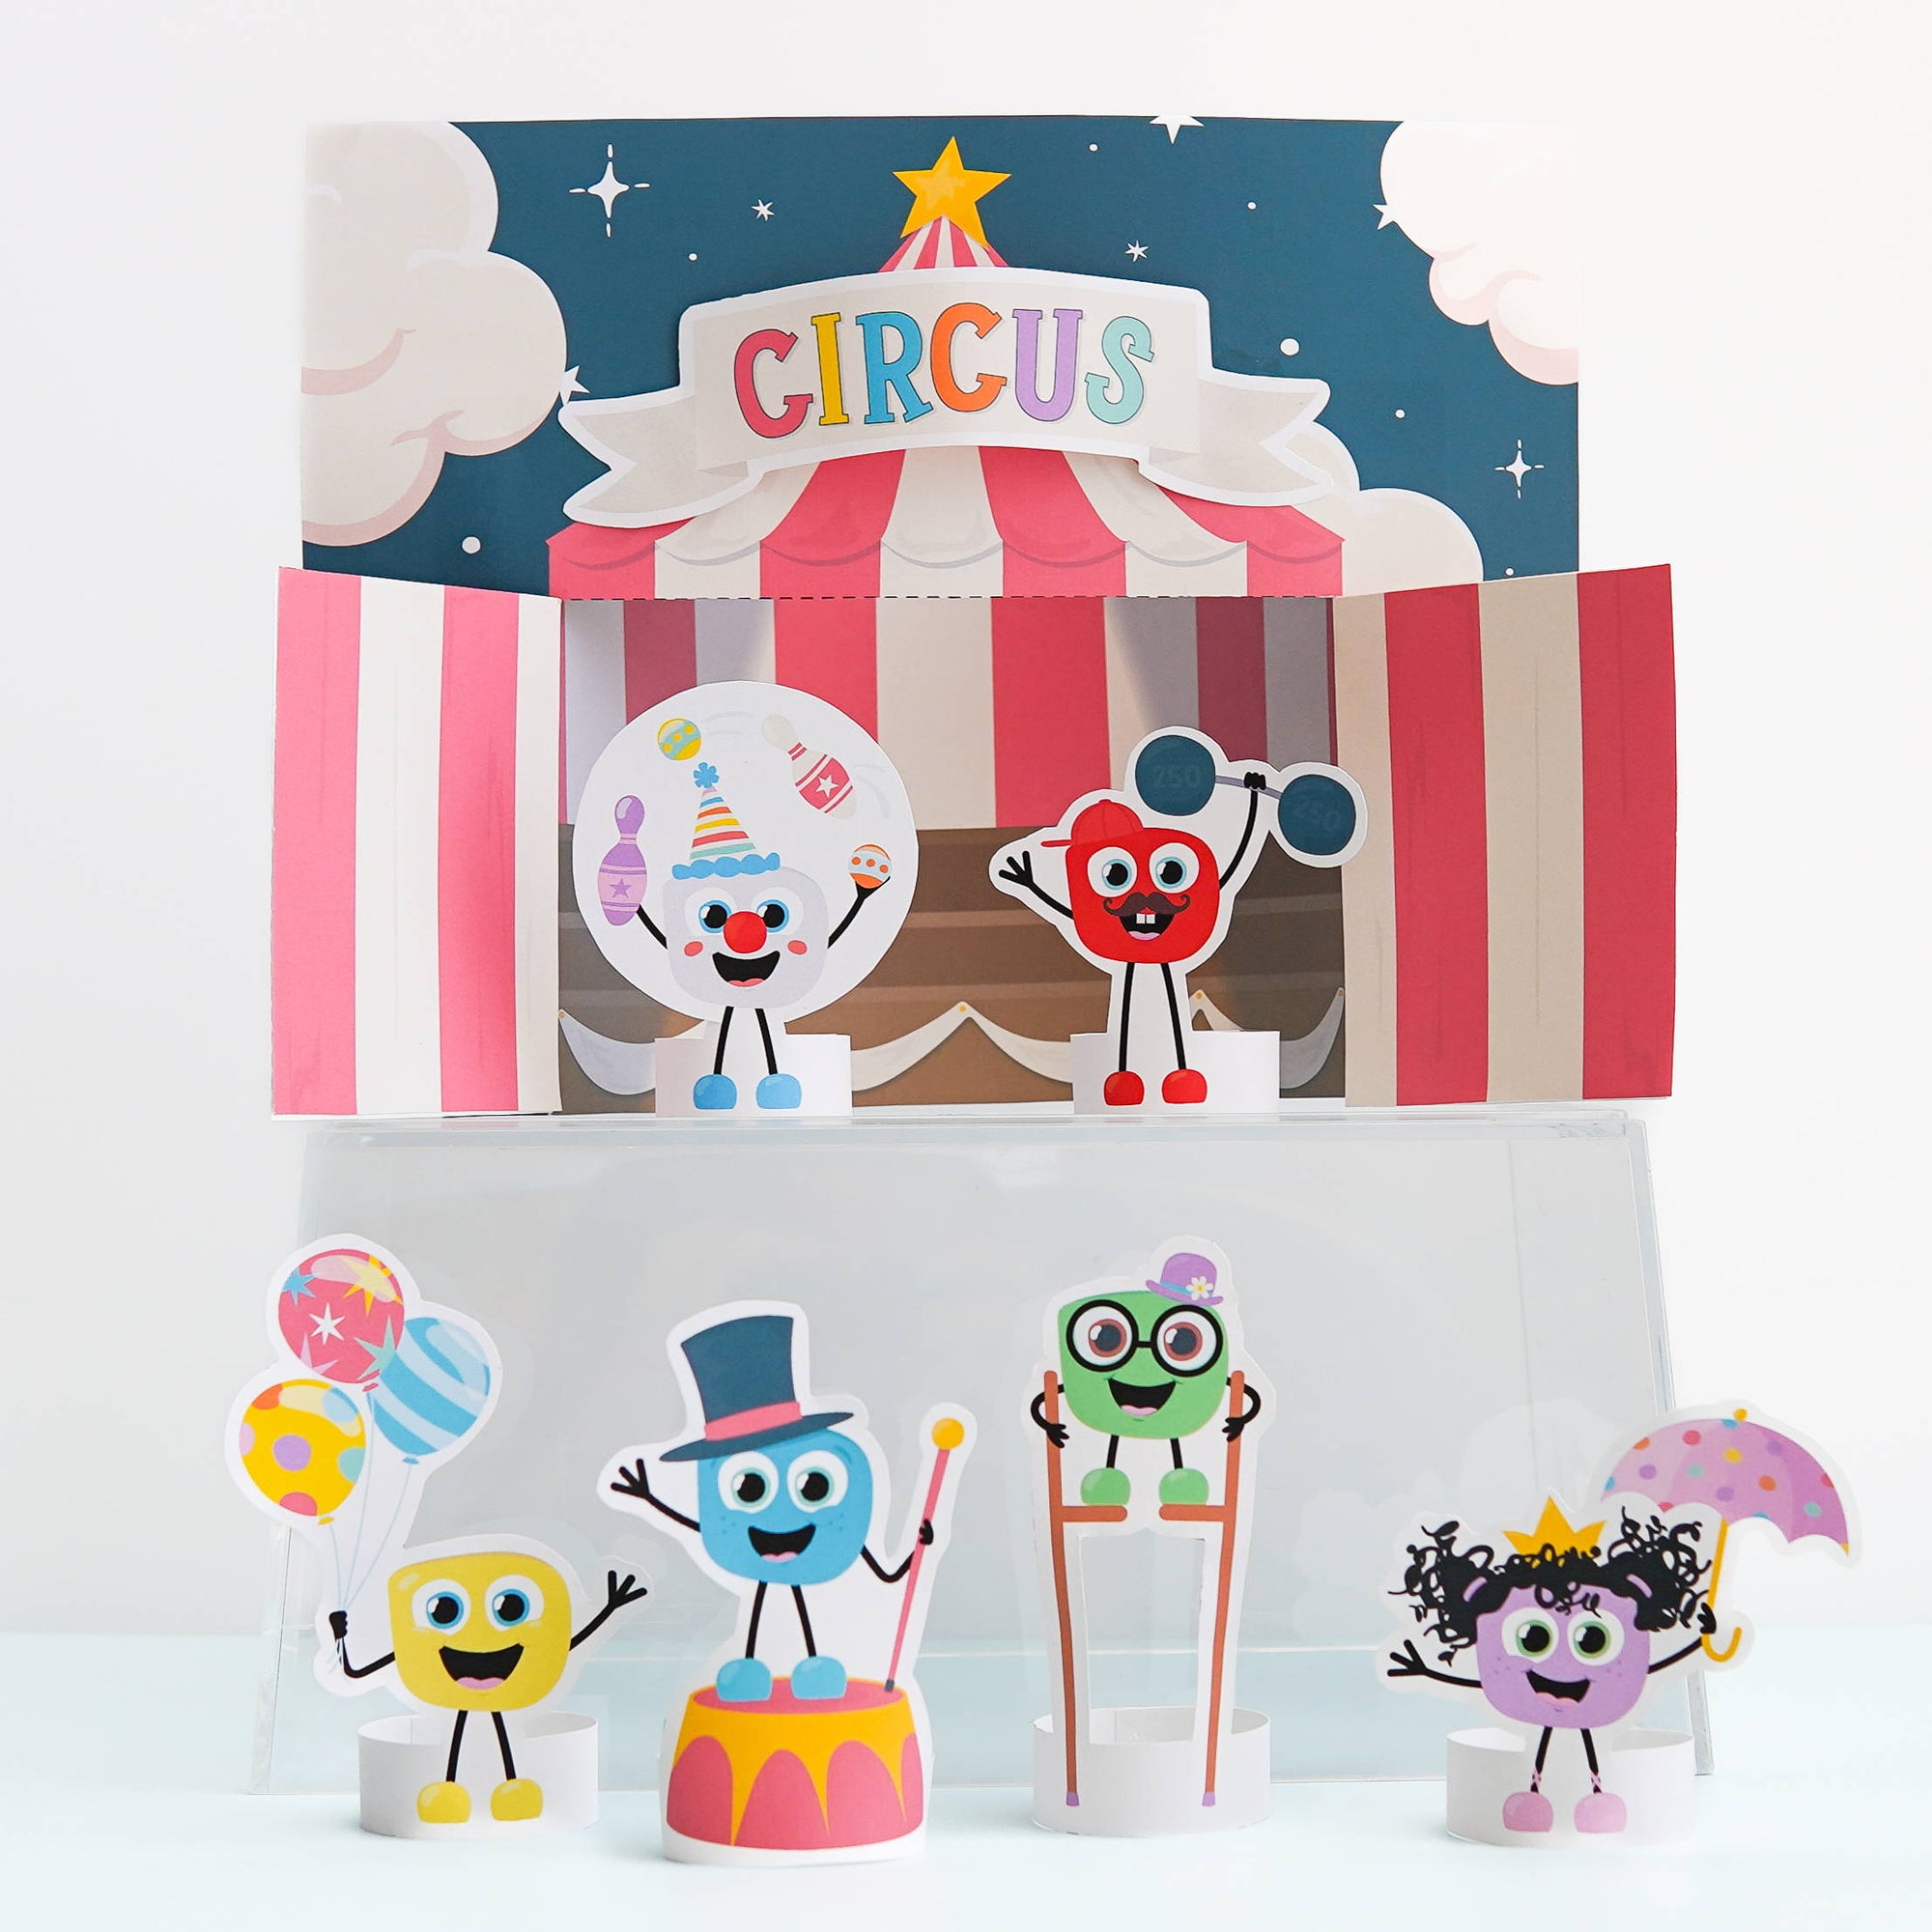 Create Your Own Circus